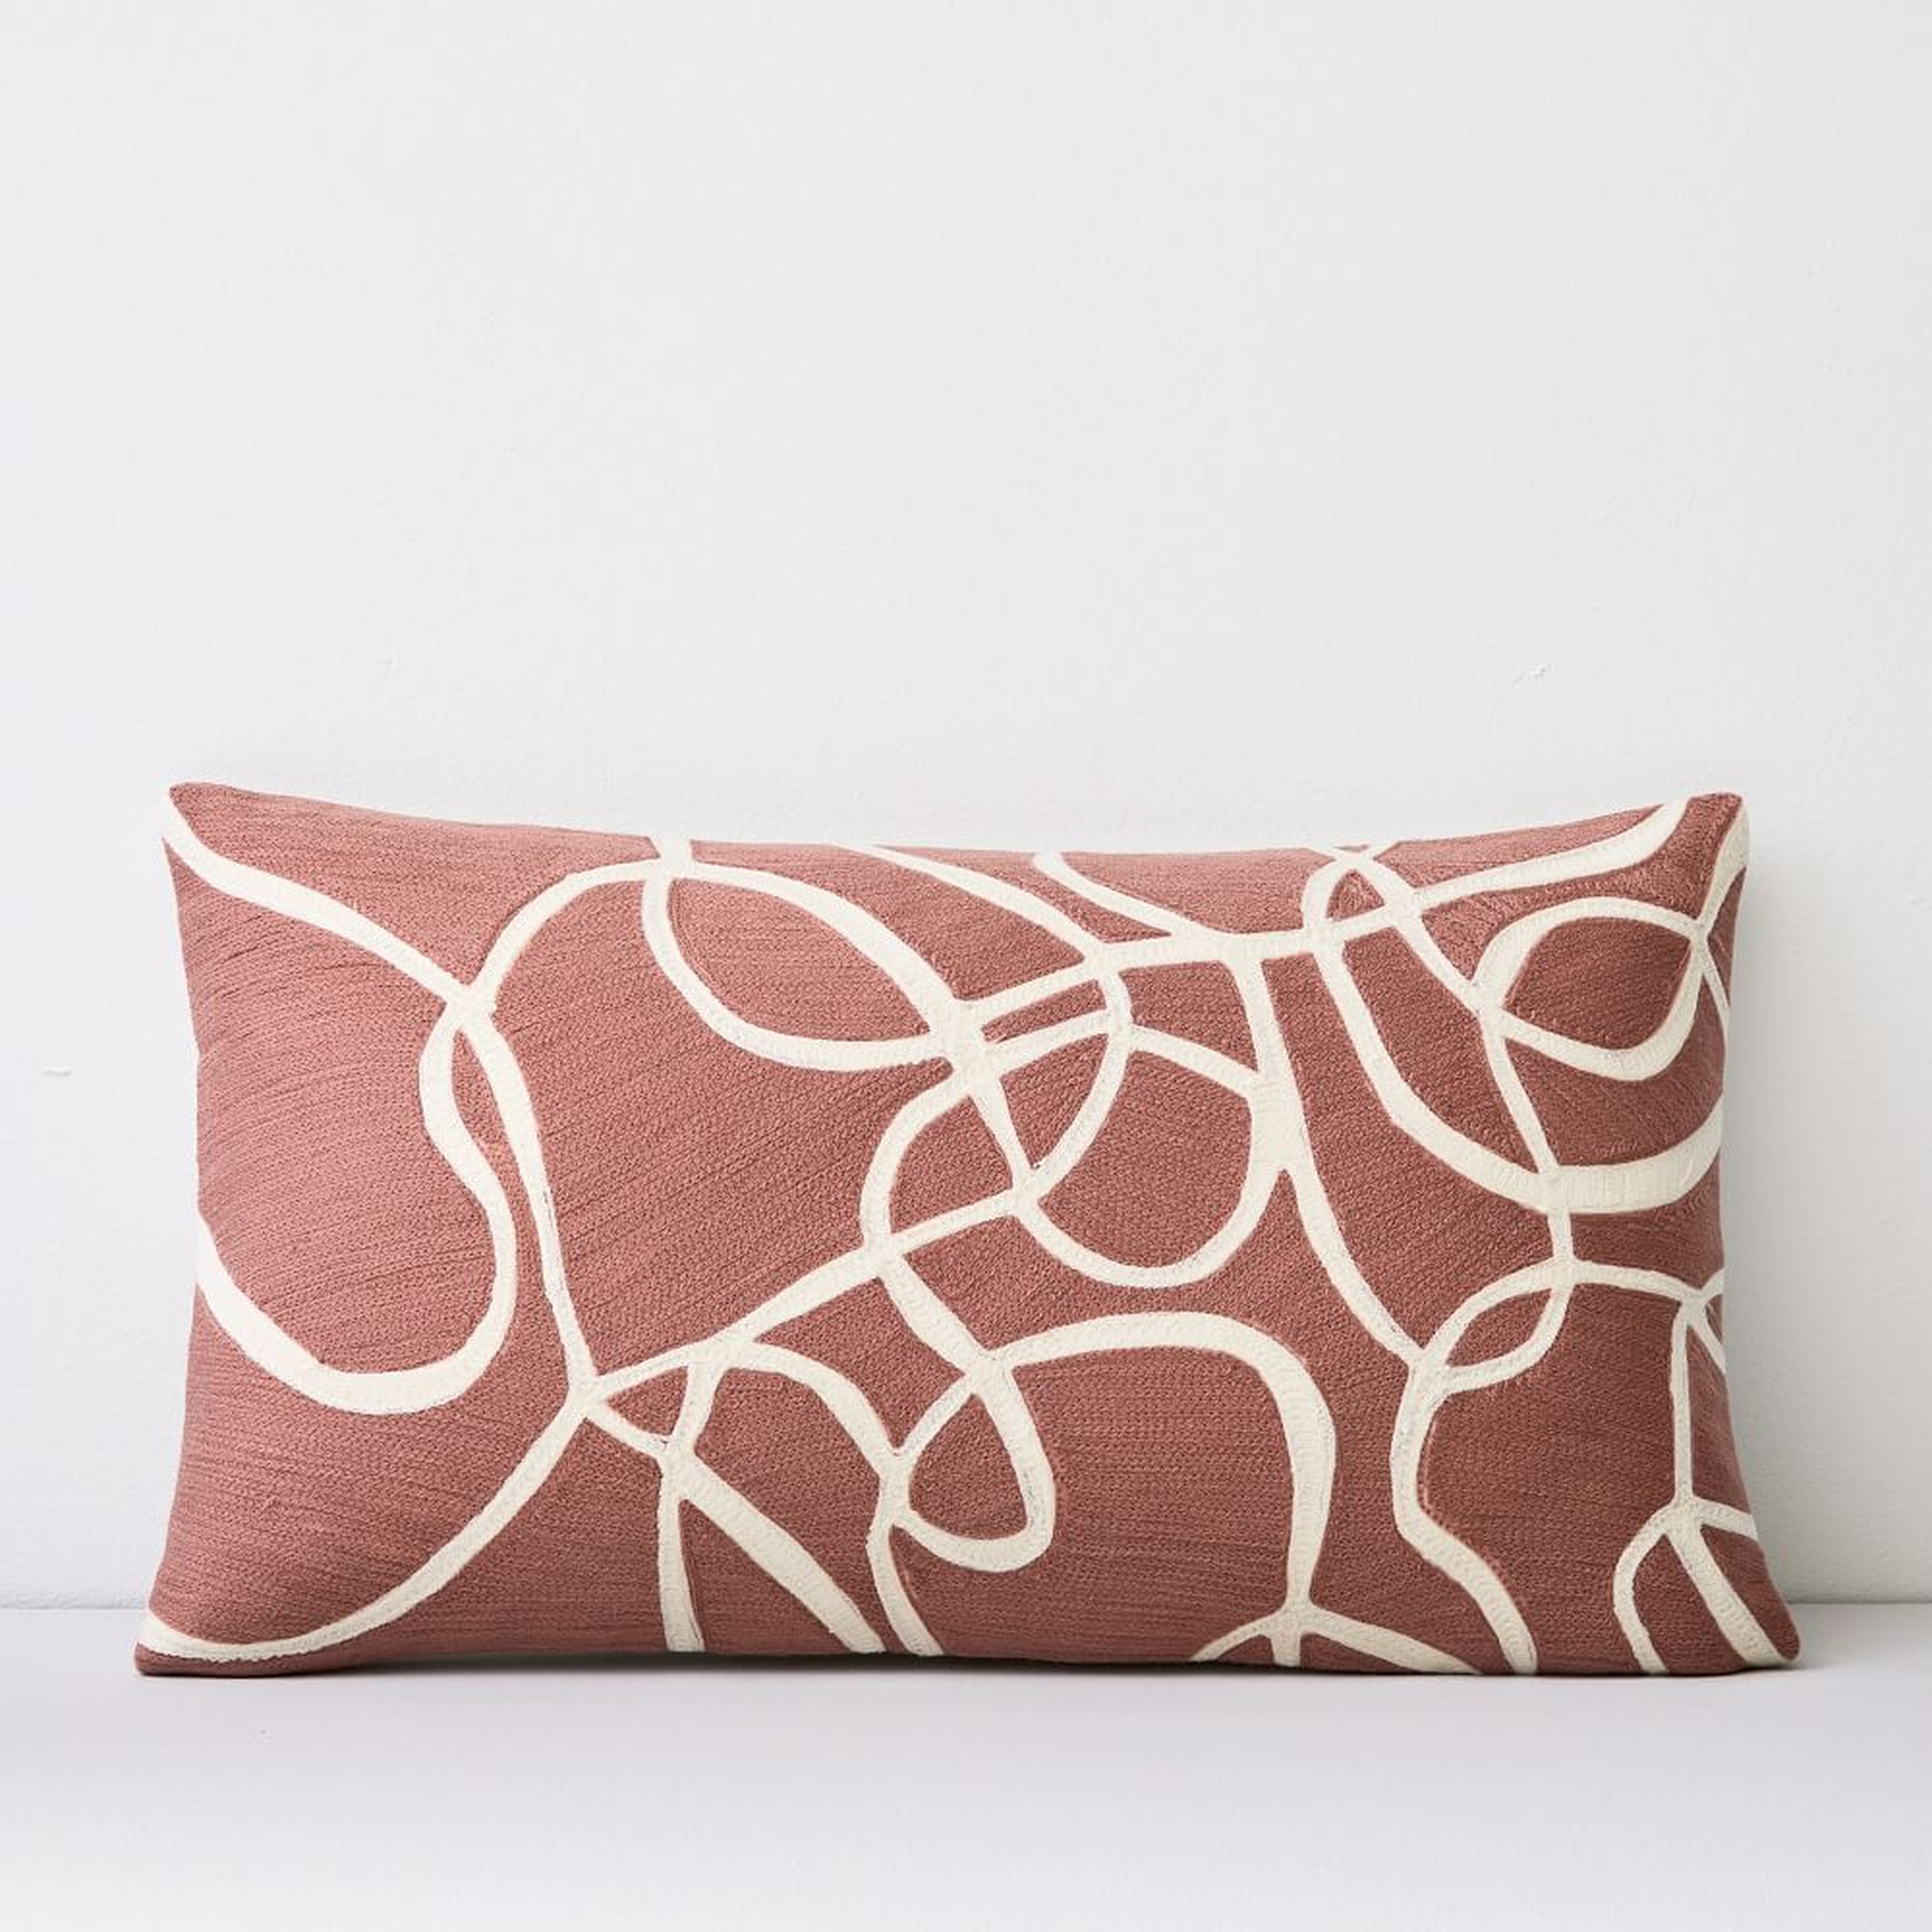 Crewel Rope Pillow Cover, Pink Stone, 12"x21" - West Elm